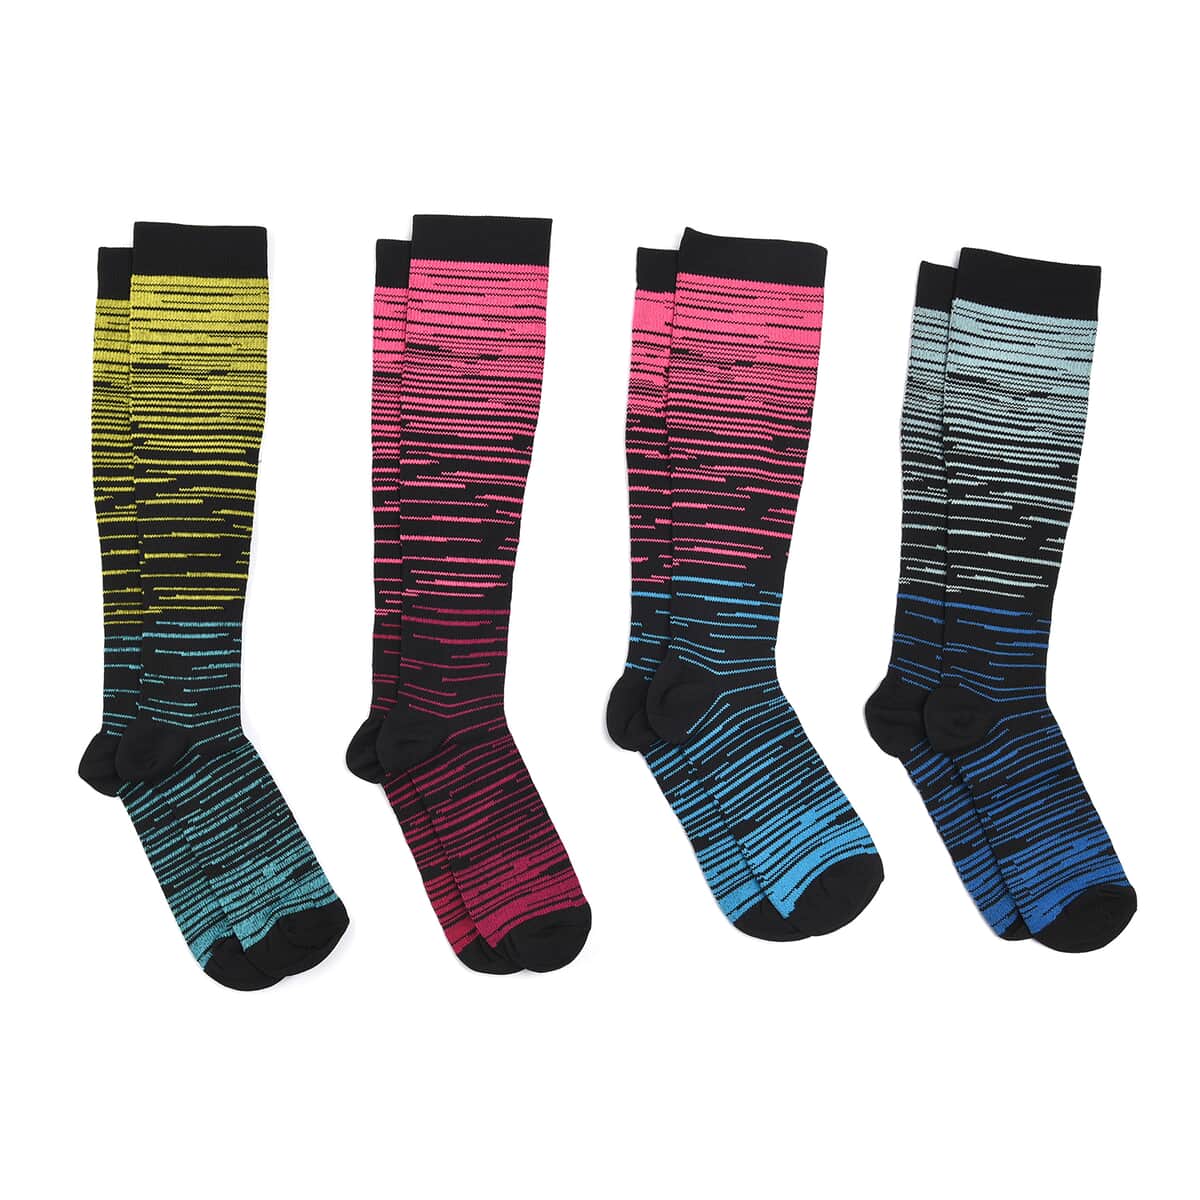 Set of 4 Pairs Knee Length Copper Infused Compression Socks - Multi Color (S/M) image number 0